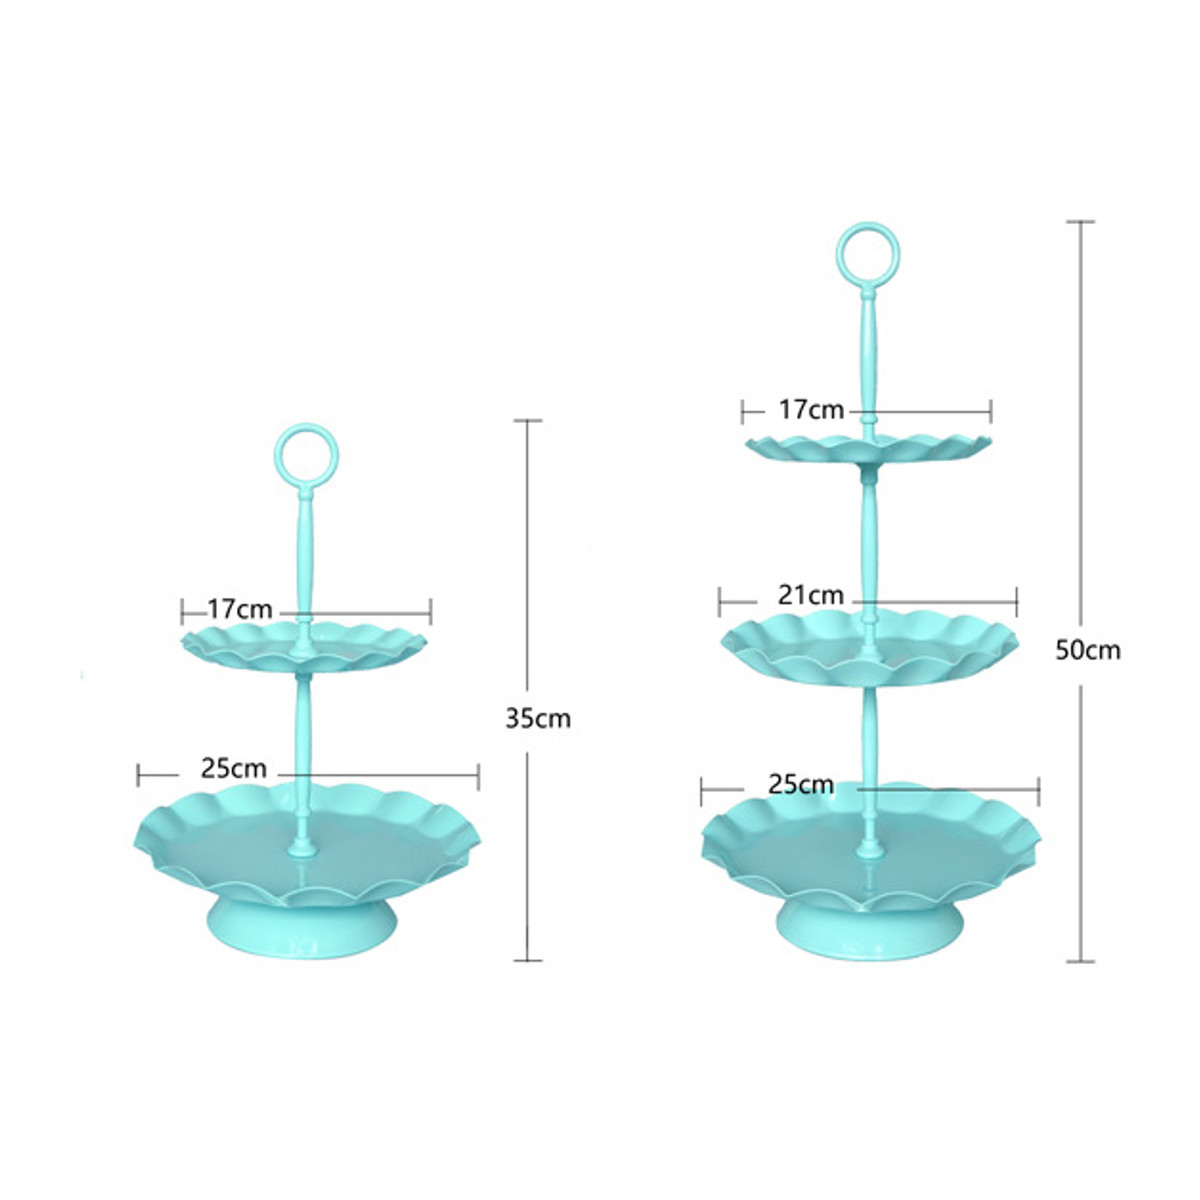 2--3-Ters-Blue-Cake-Holder-Cupcake-Stand-Birthday-Wedding-Party-Display-Holder-Decorations-1340743-12